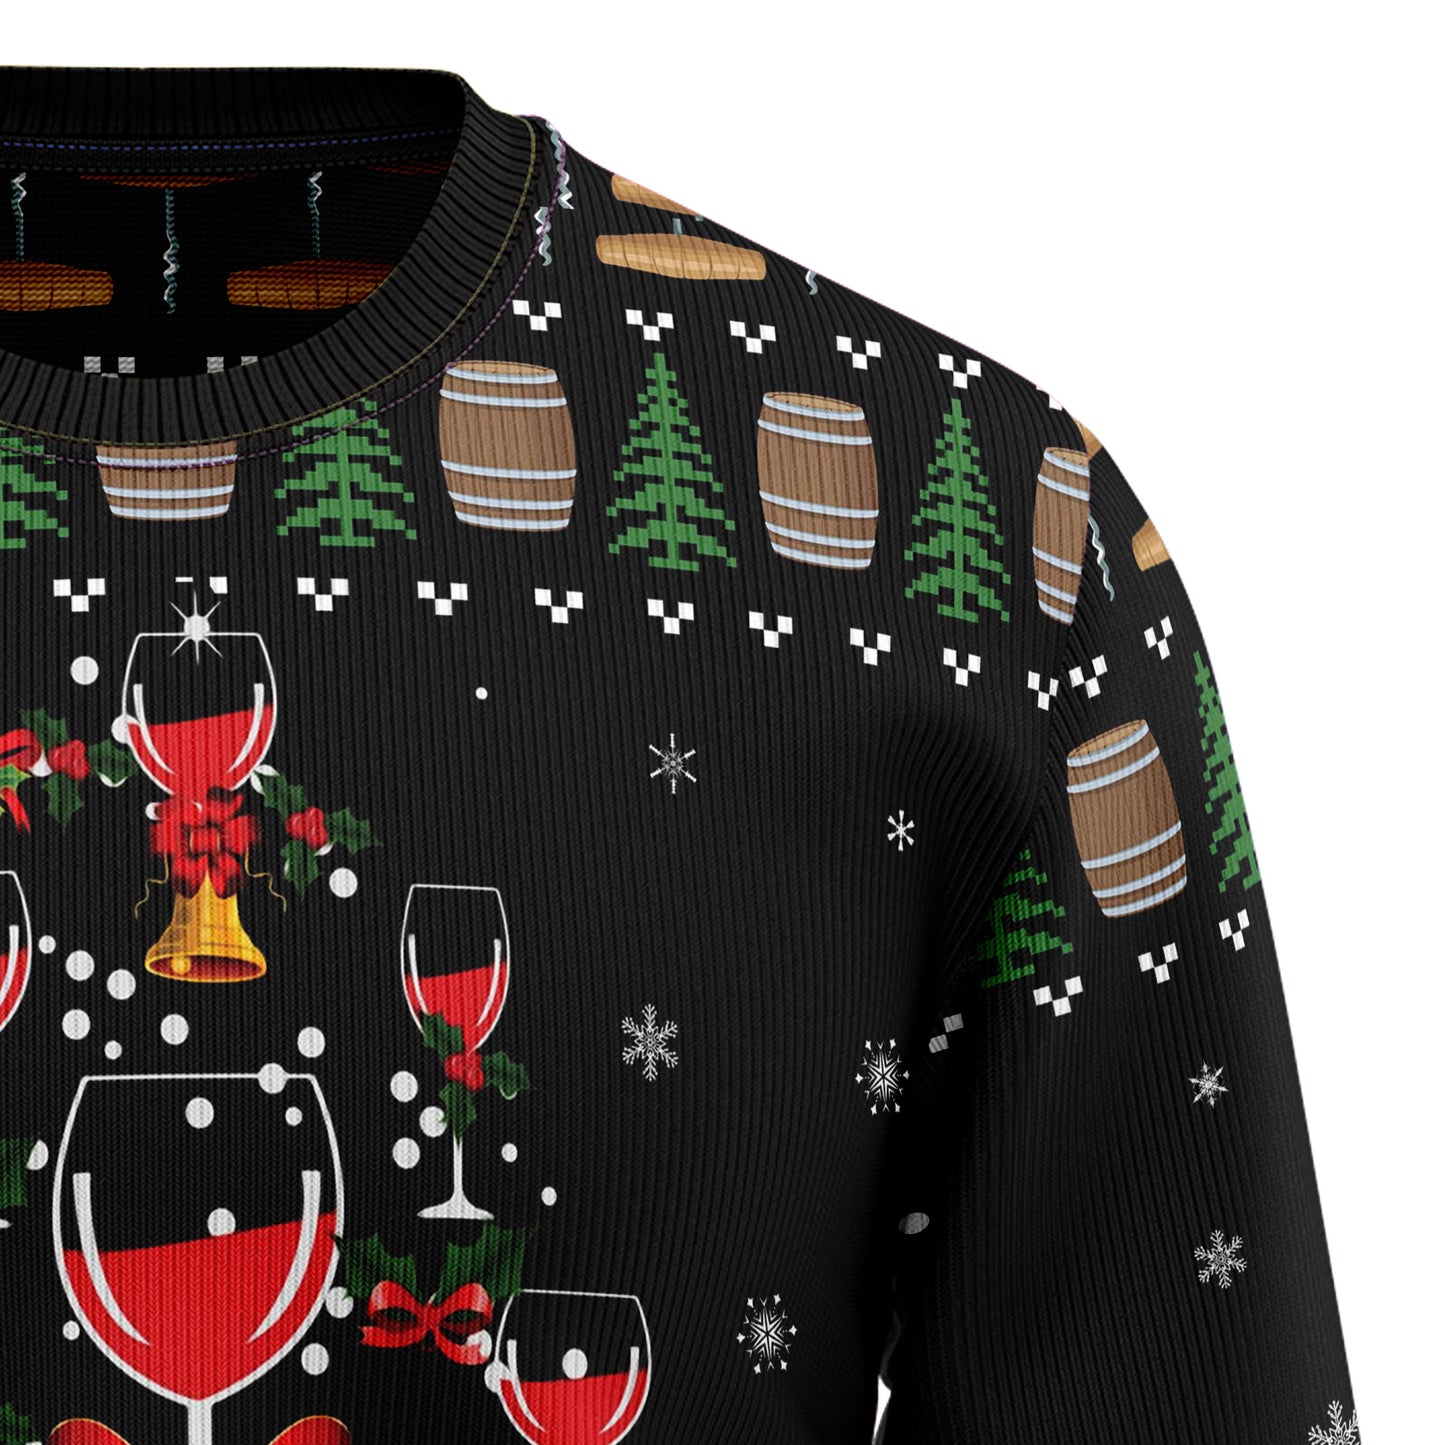 Red Wine Christmas T110 Ugly Christmas Sweater